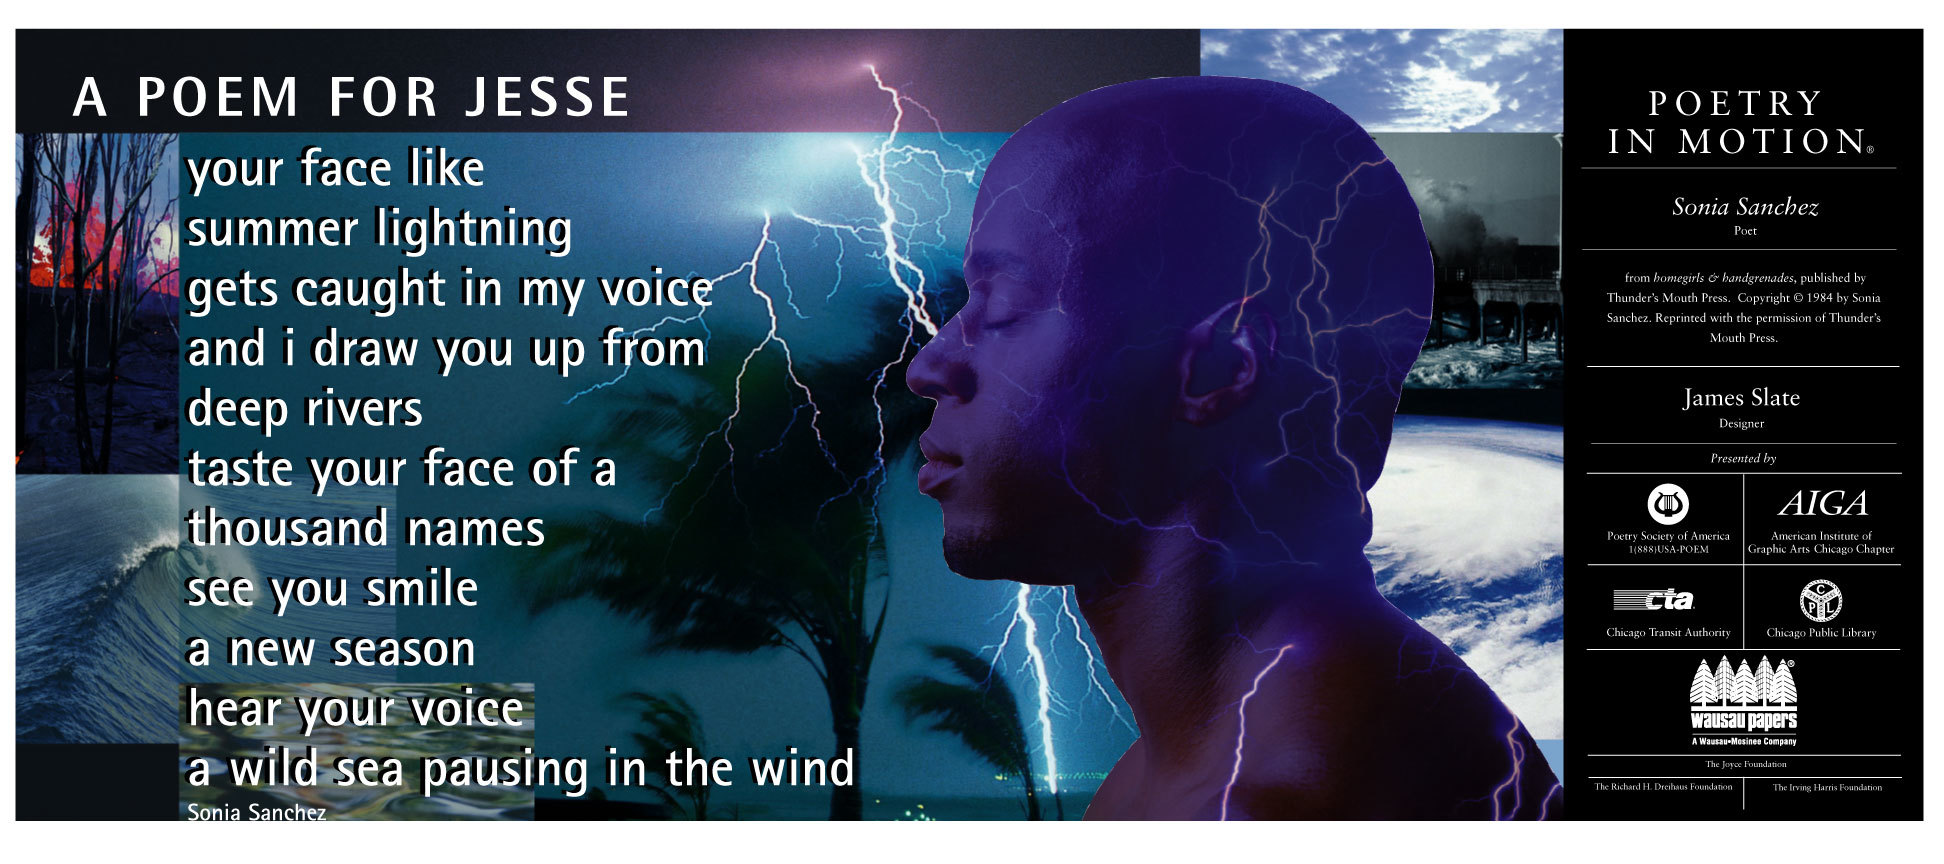 A poster is decorated with scenes of trees, bodies of water, lightning, and clouds. The poem, A Poem for Jessie by Sonia Sanchez is written in white text beside the profile of a man.